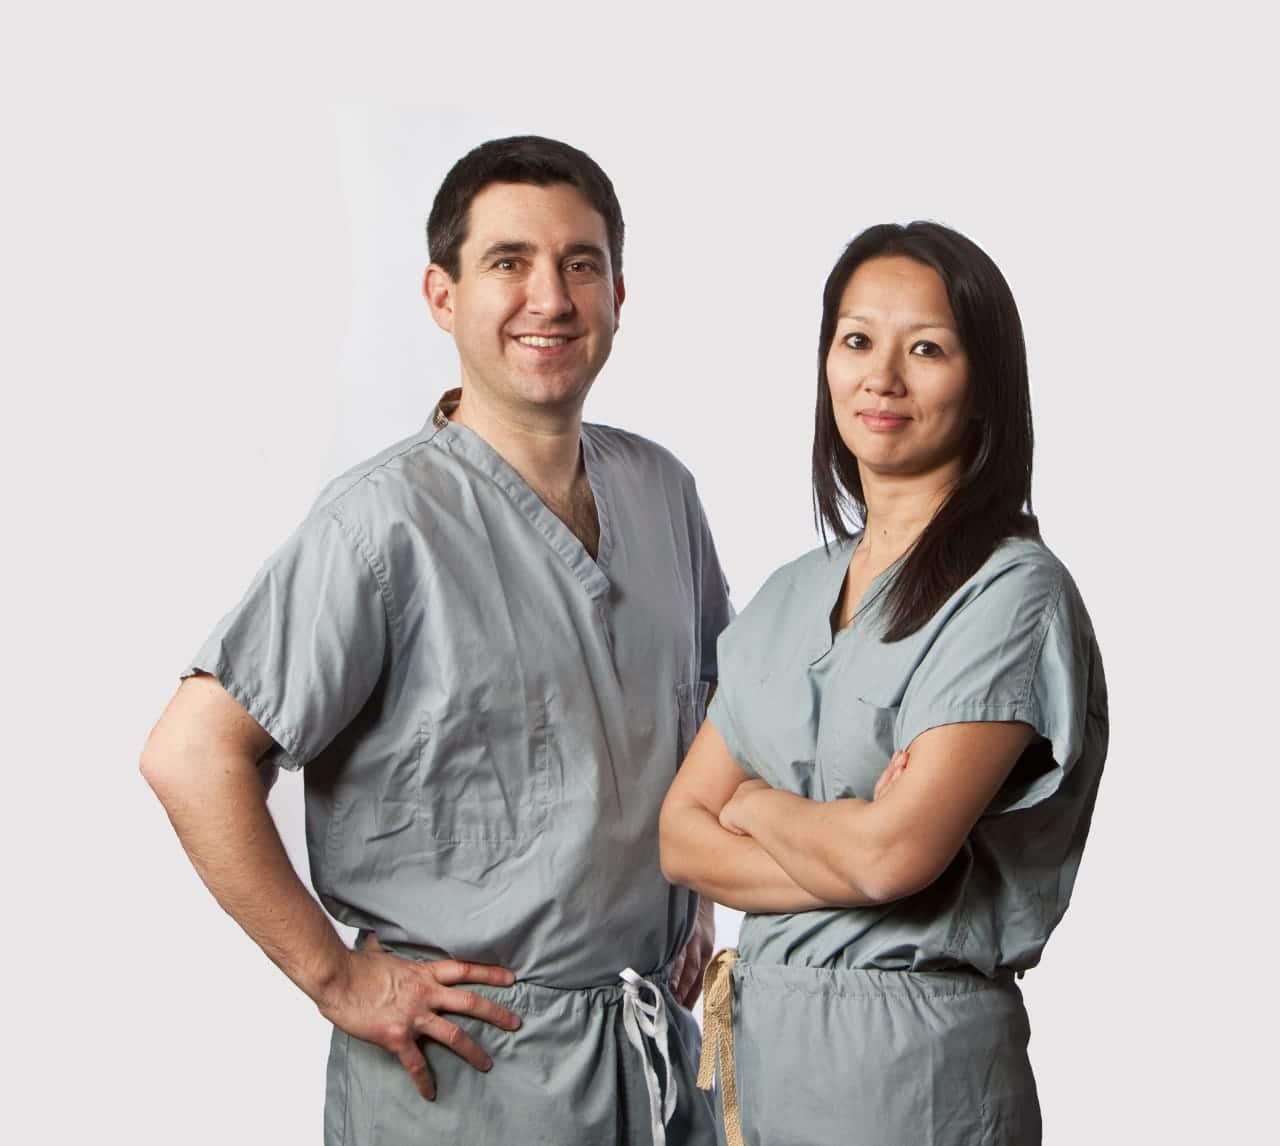 Dr. Todd Weiser and Dr. Cynthia Chin of White Plains Hospital.